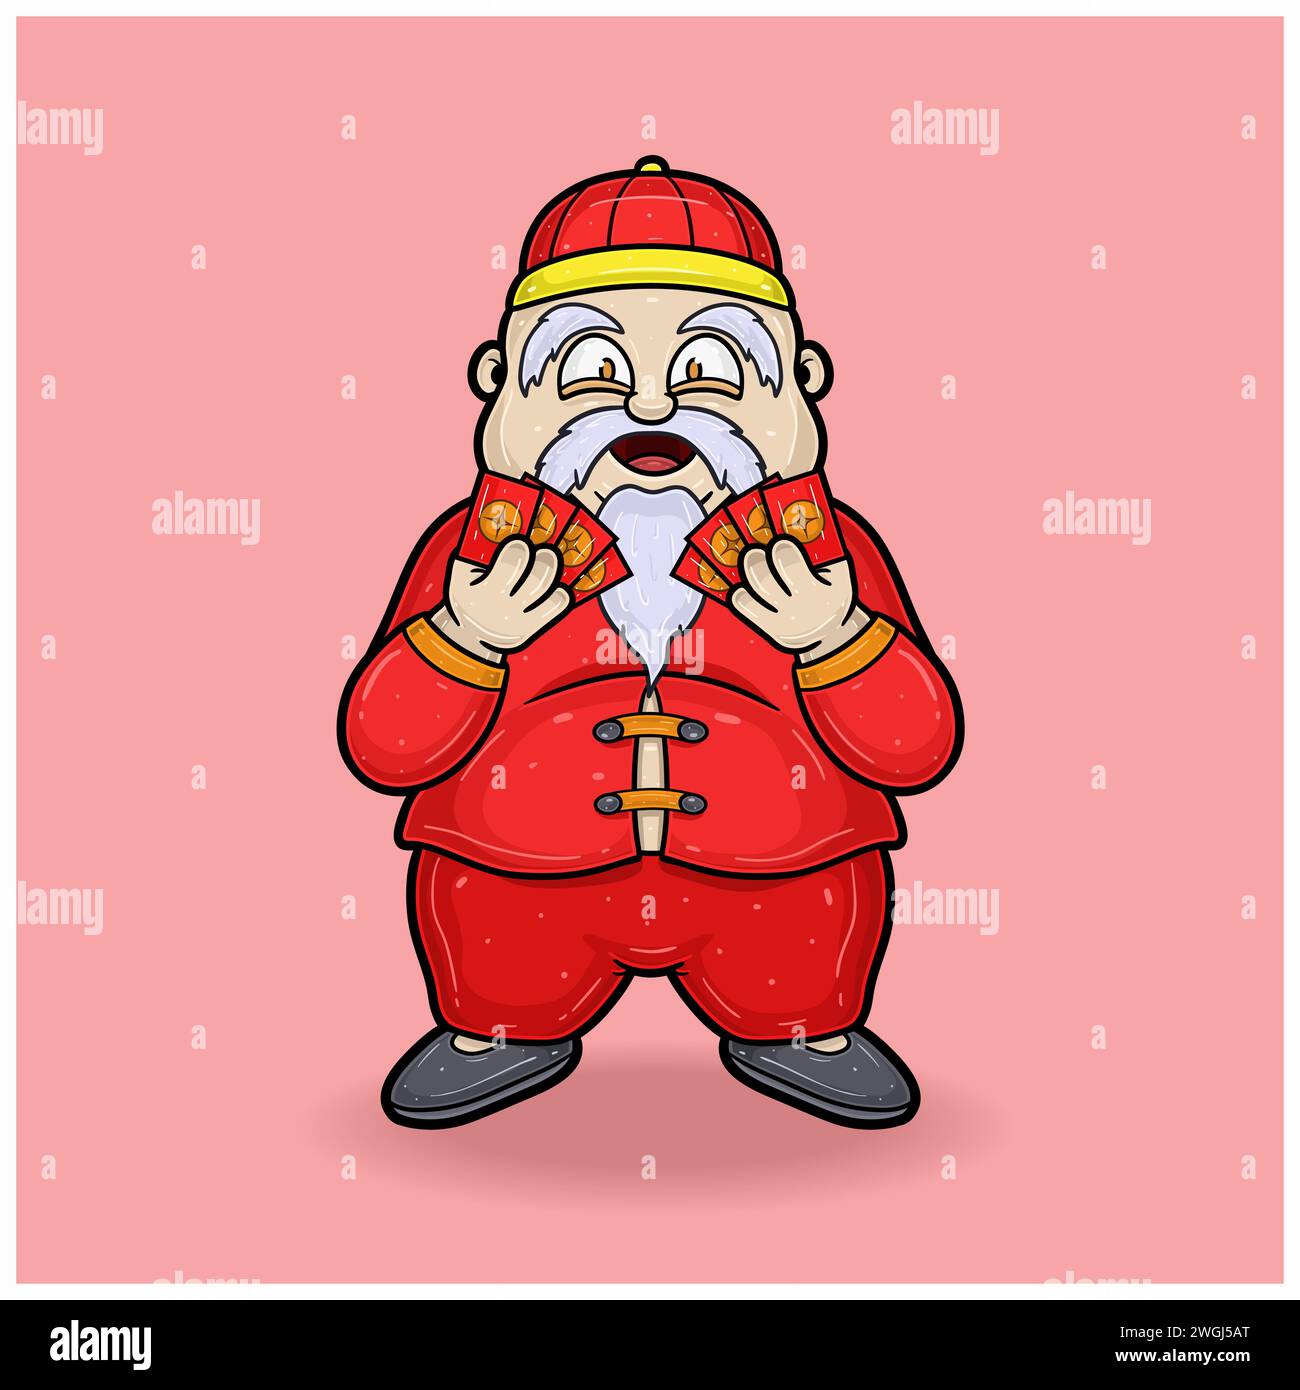 Chinese New Year Cartoon With Old Fat Man Bring Red Envelope. Vector Illustrations. Stock Vector